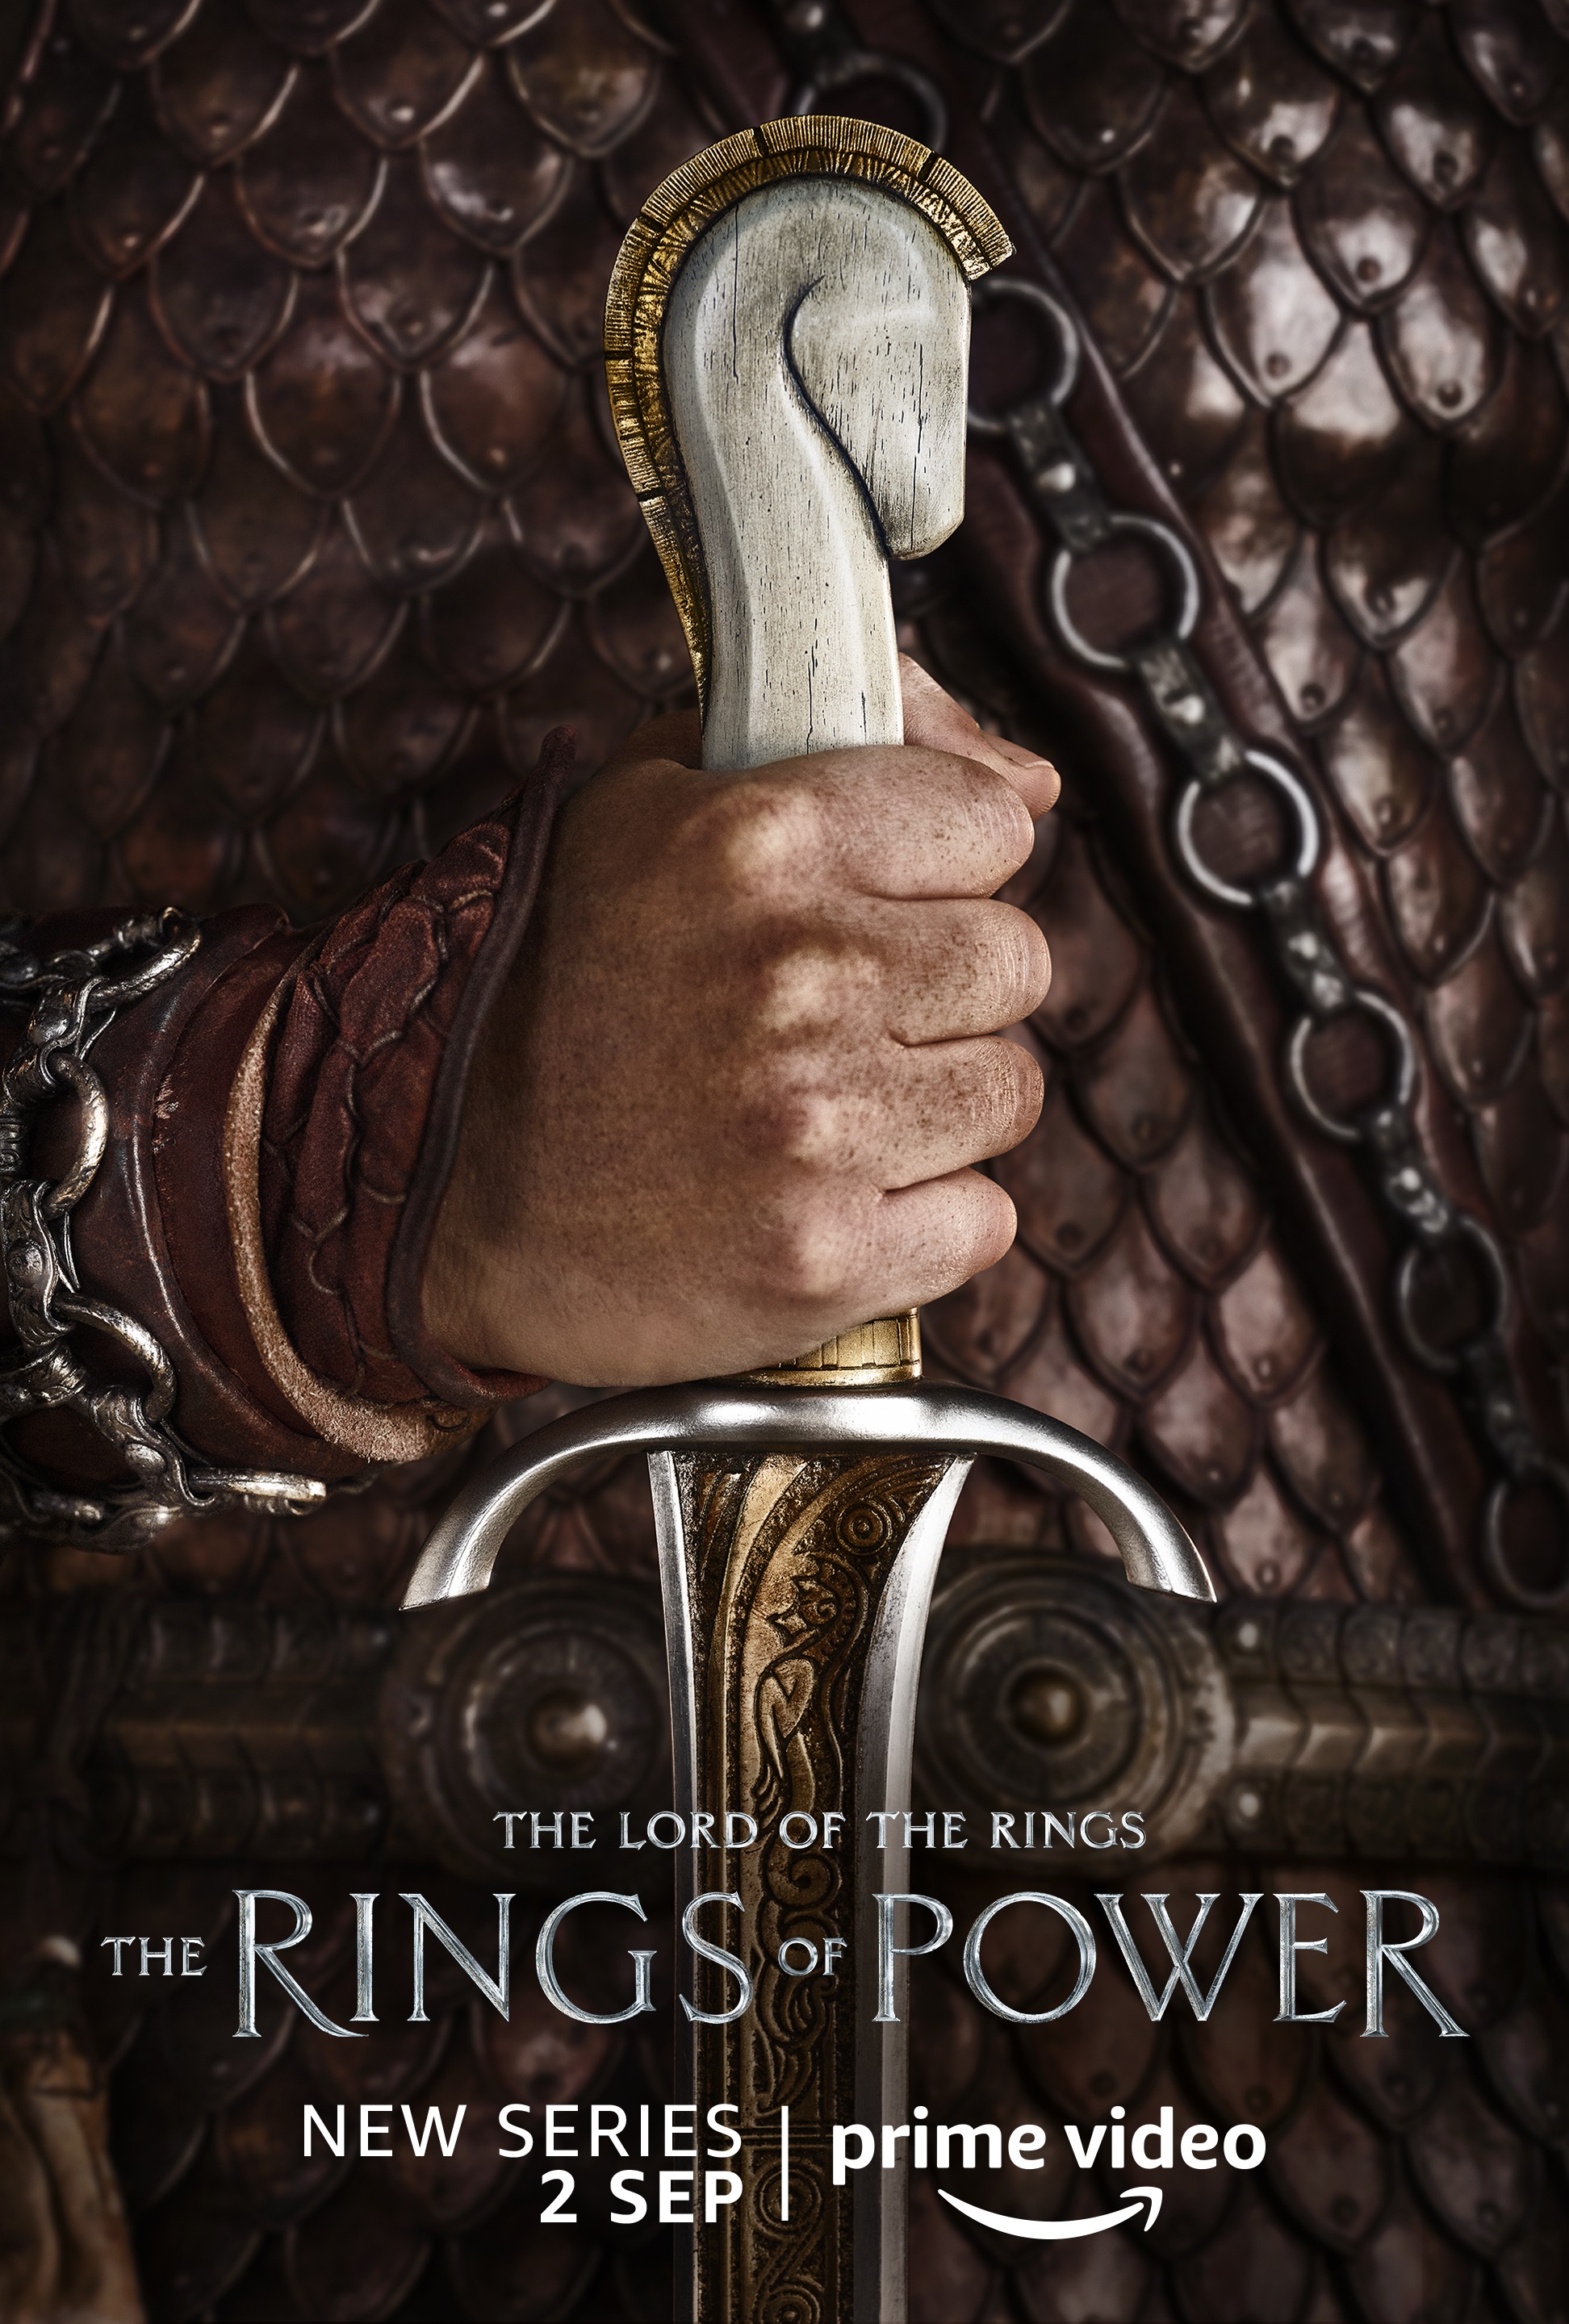 A Rohan knight character poster for Lord of the Rings: The Rings of Power